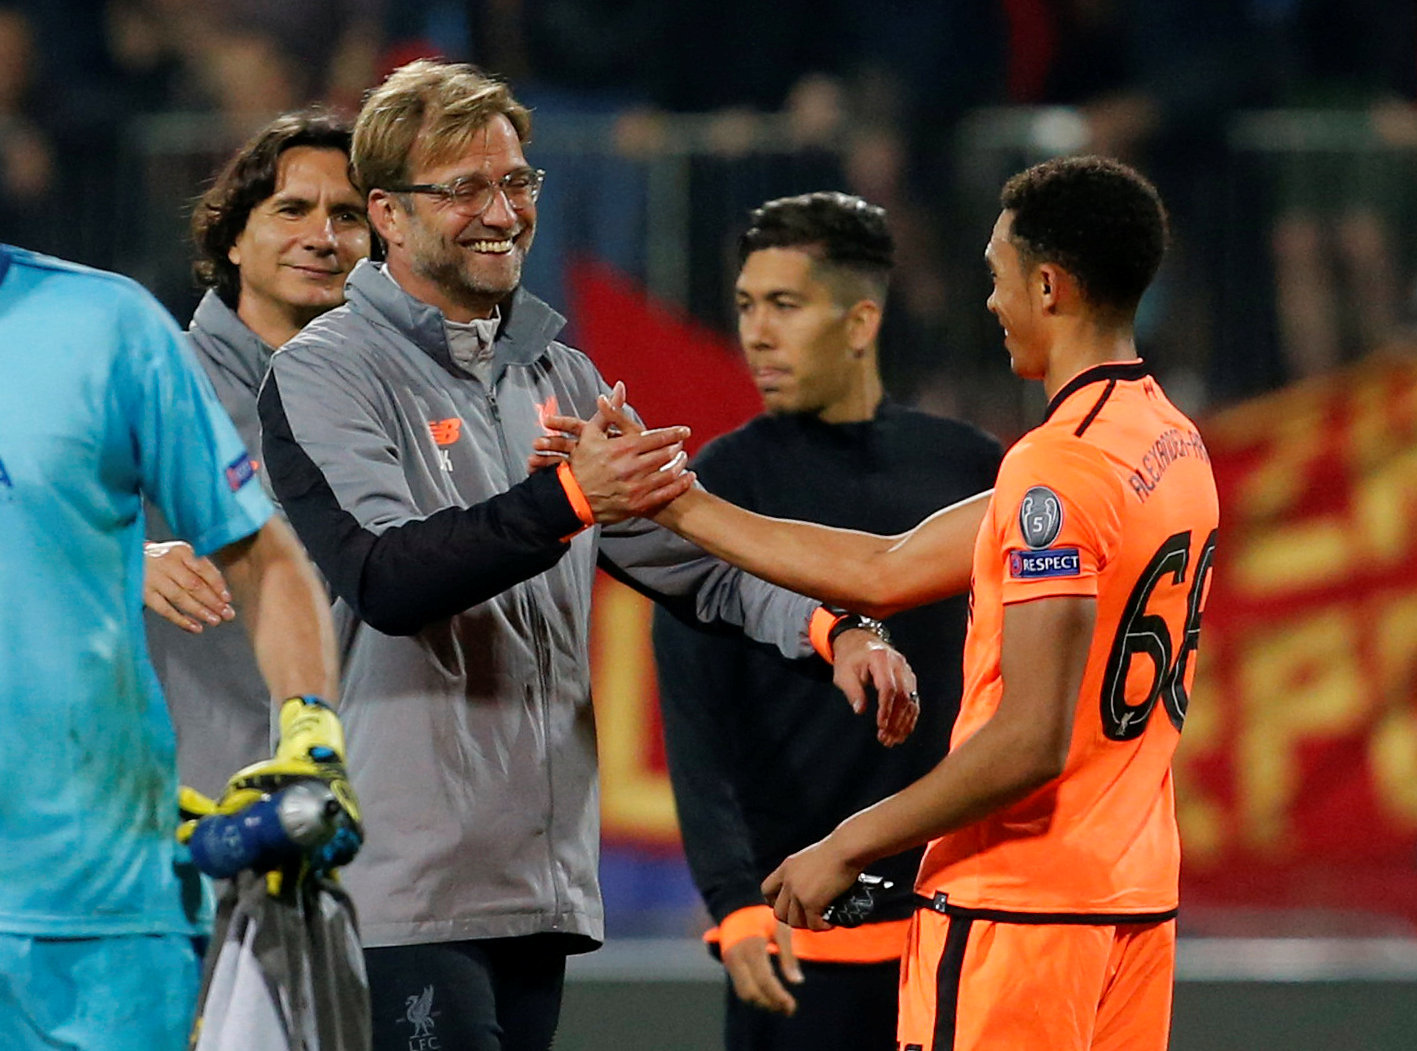 Football: Klopp's Liverpool send timely reminder of attacking brilliance